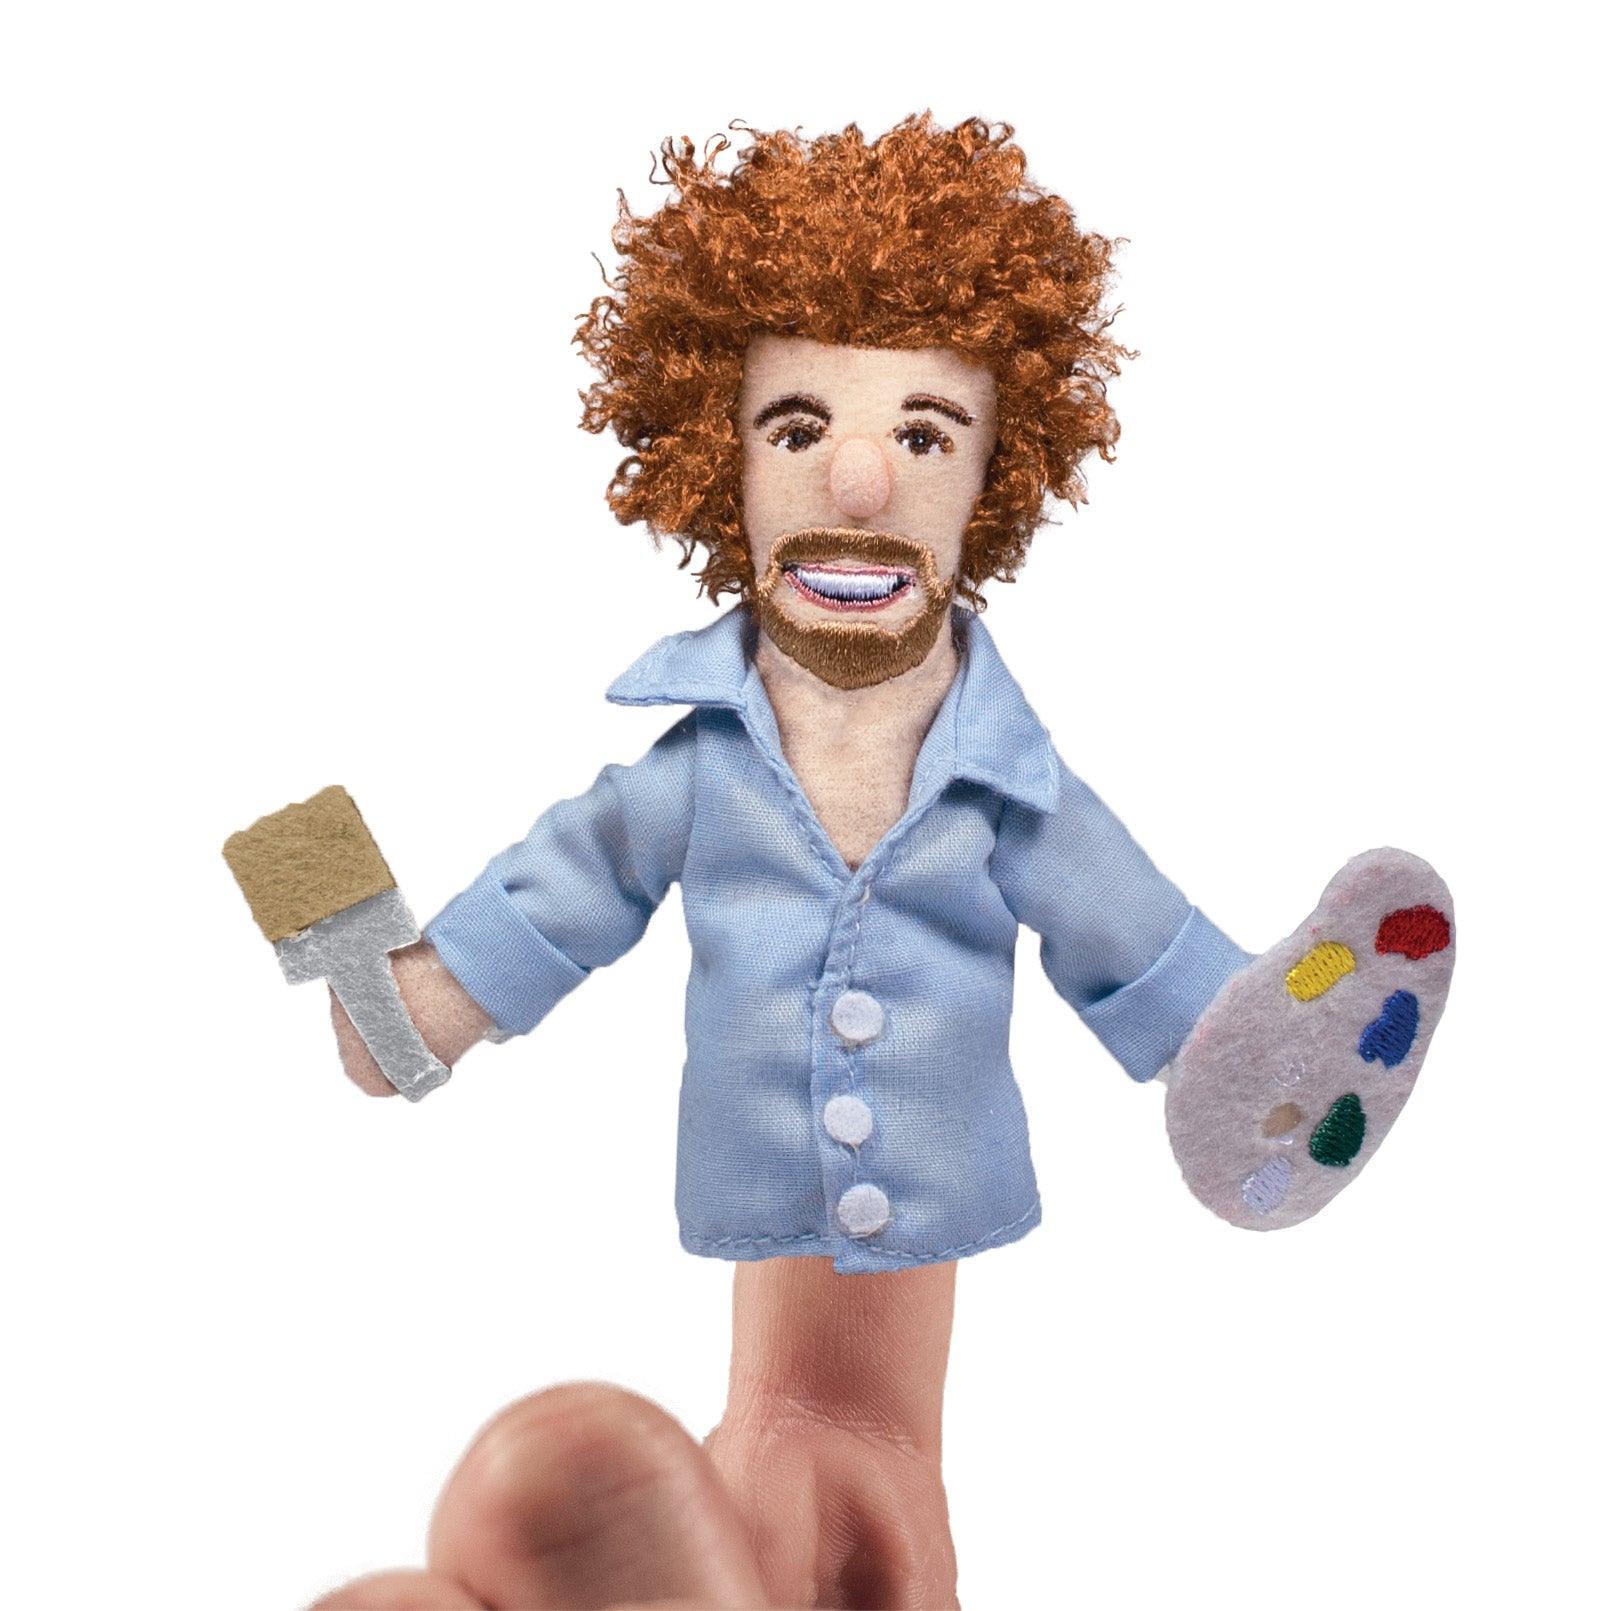 PLAYTIME with BOB ROSS // Miniature paint by numbers 